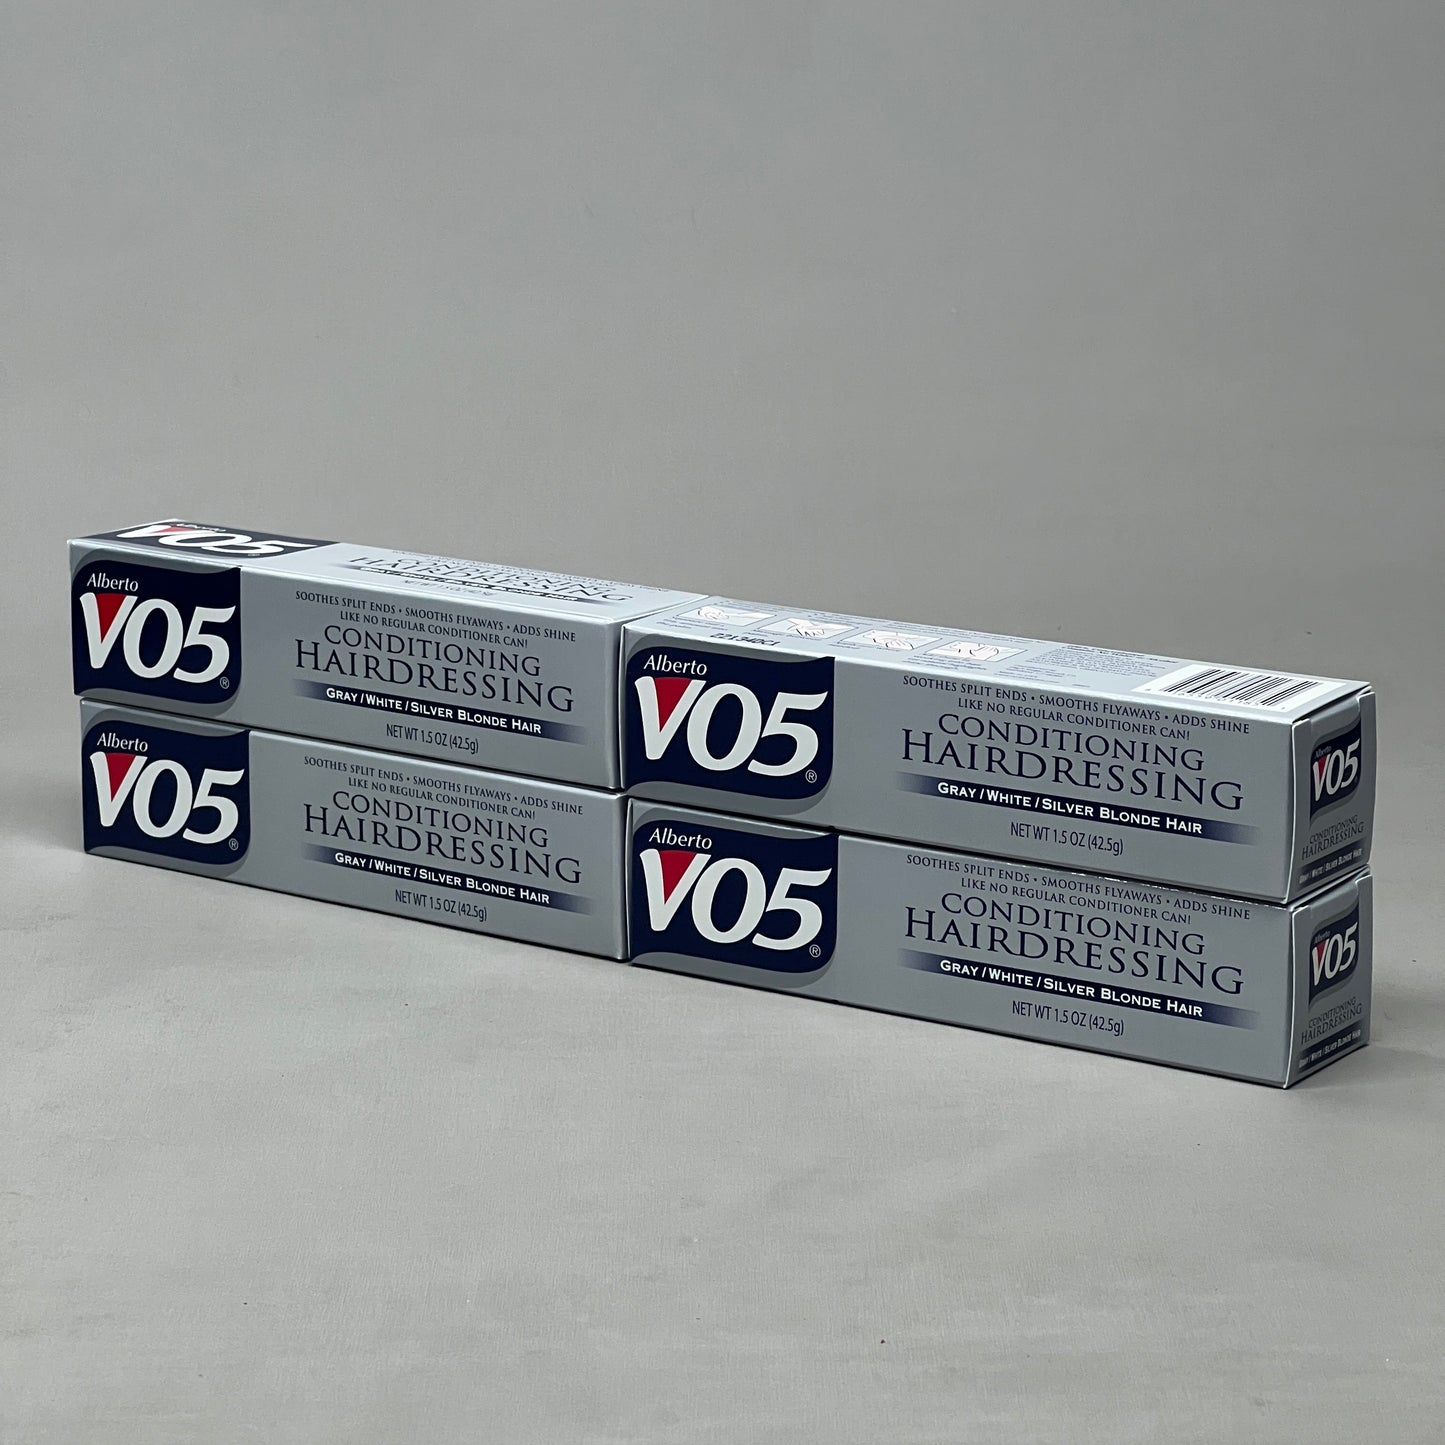 ALBERTO Vo5 Conditioning Hairdressing 4-PACK! Gray/White/Silver Blonde Hair 1.5 oz (New)